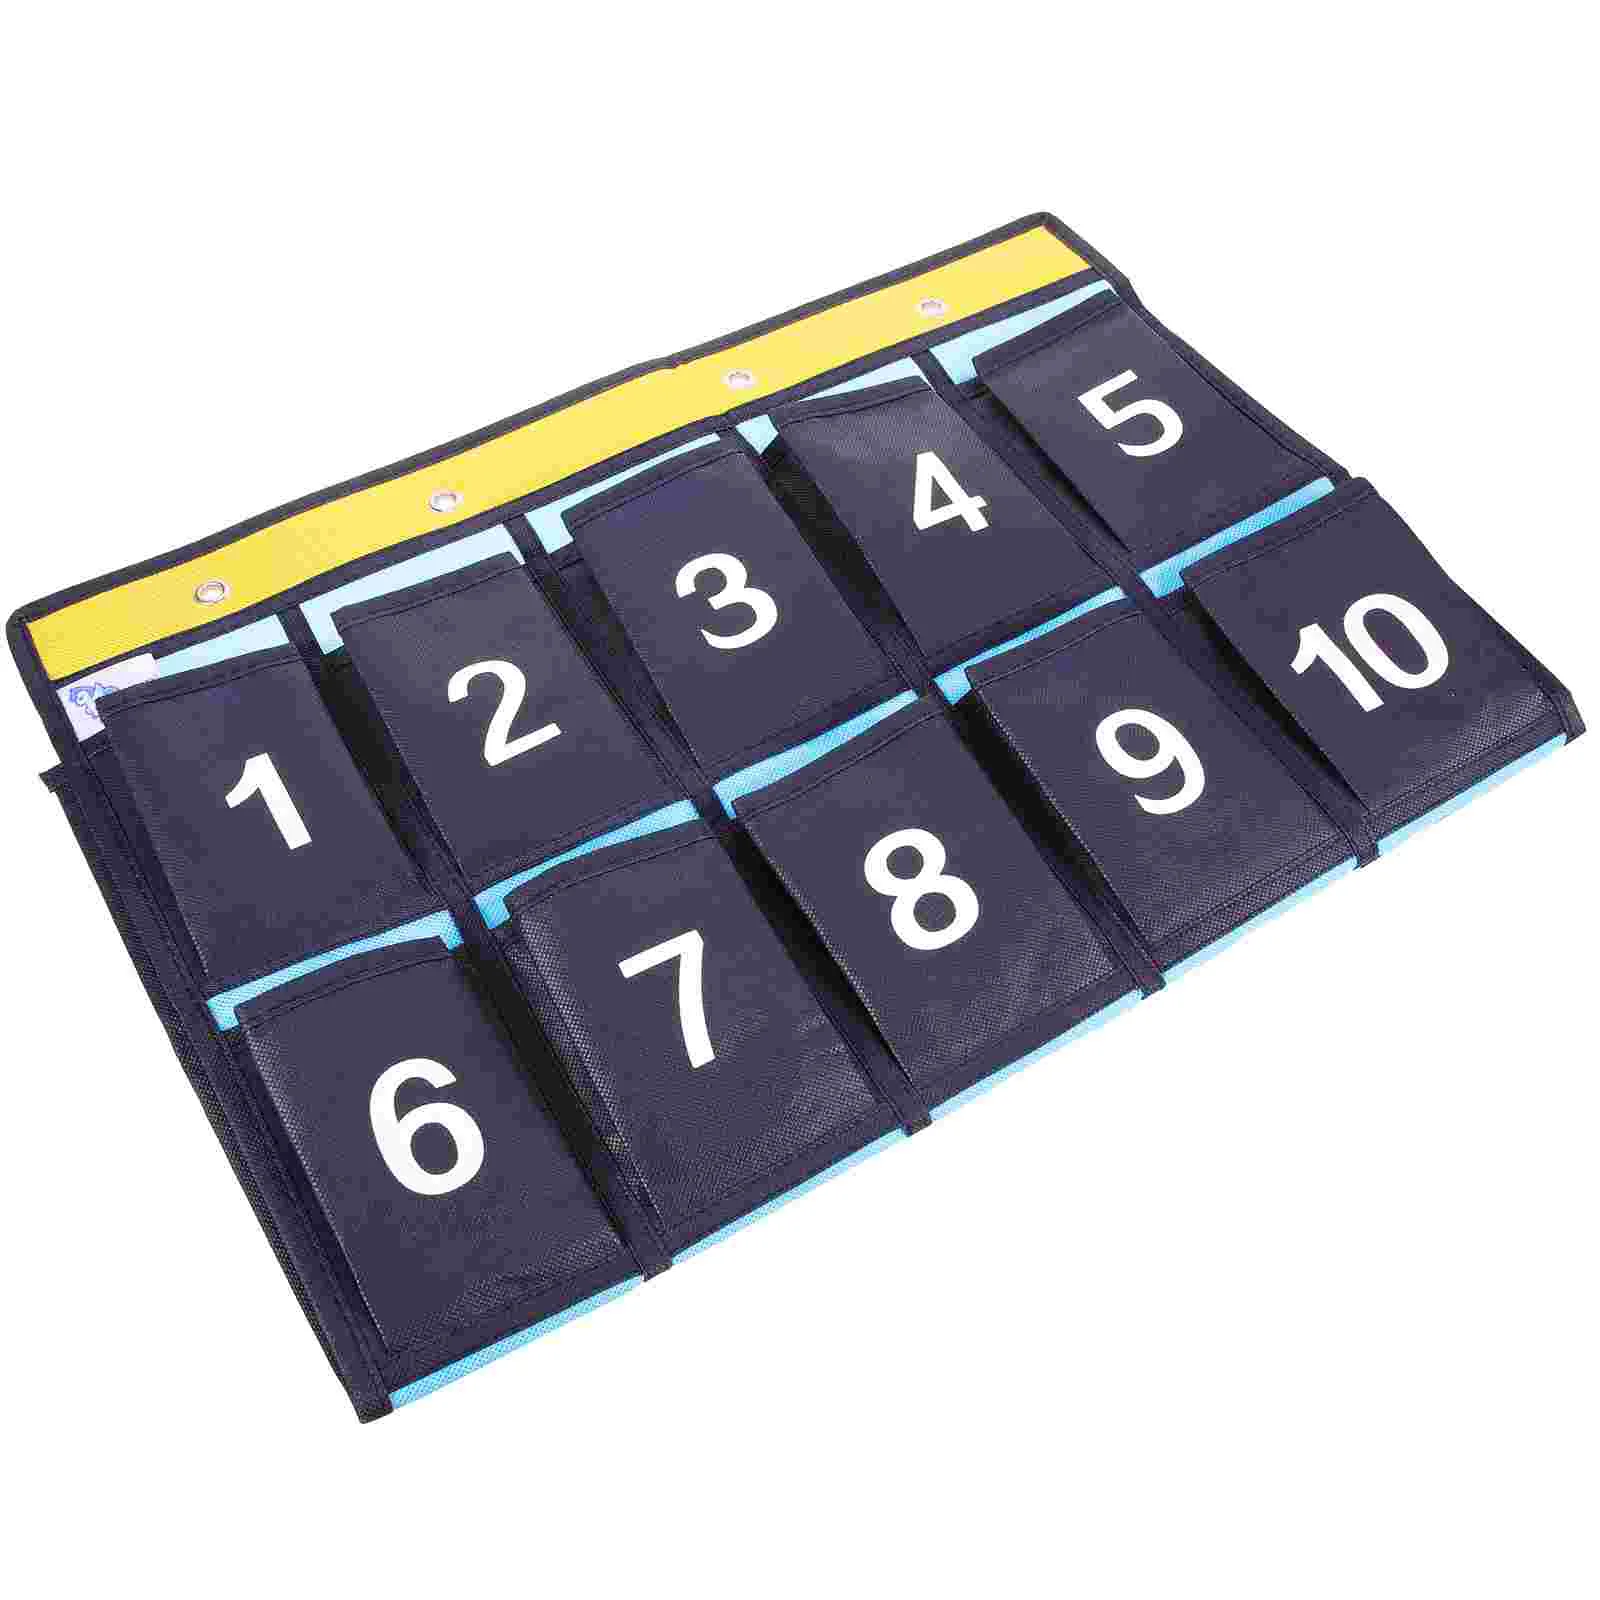 

Numbered Phone Organizer Classroom Pocket School Supply for Office Classroom Sundries Holder